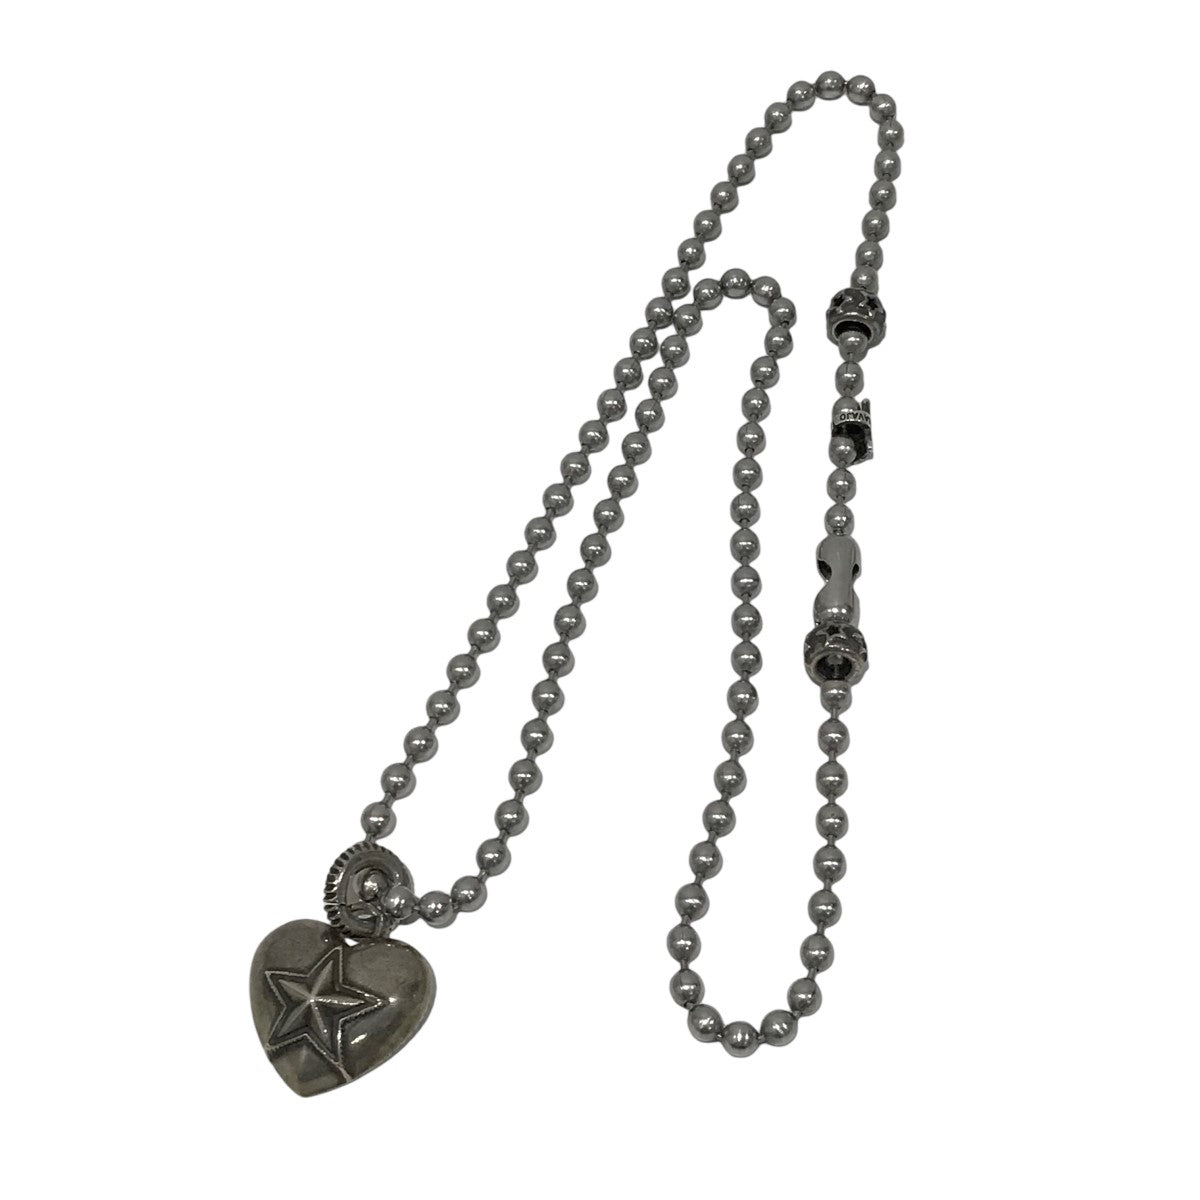 CODY SANDERSON(コディサンダーソン) Heart ＆ Sheriff Star Stainless Ball Chain  Necklace×2 HOLLOW STAR RONDELLE BEADネックレス ４点セット サイズ 13｜【公式】カインドオルオンライン 